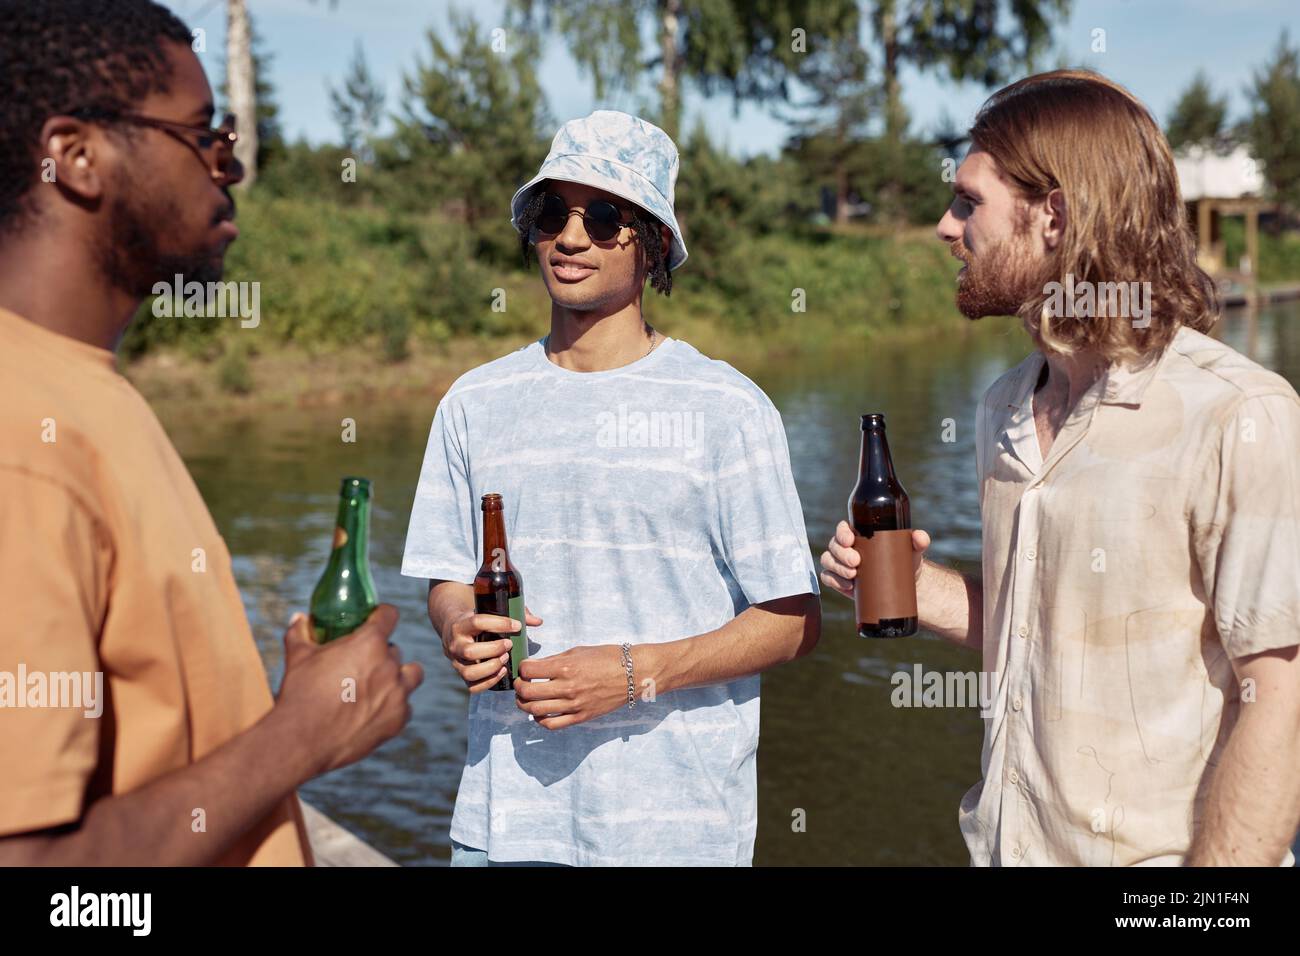 Waist up portrait of three young men drinking beer outdoors and chatting in Summer setting Stock Photo